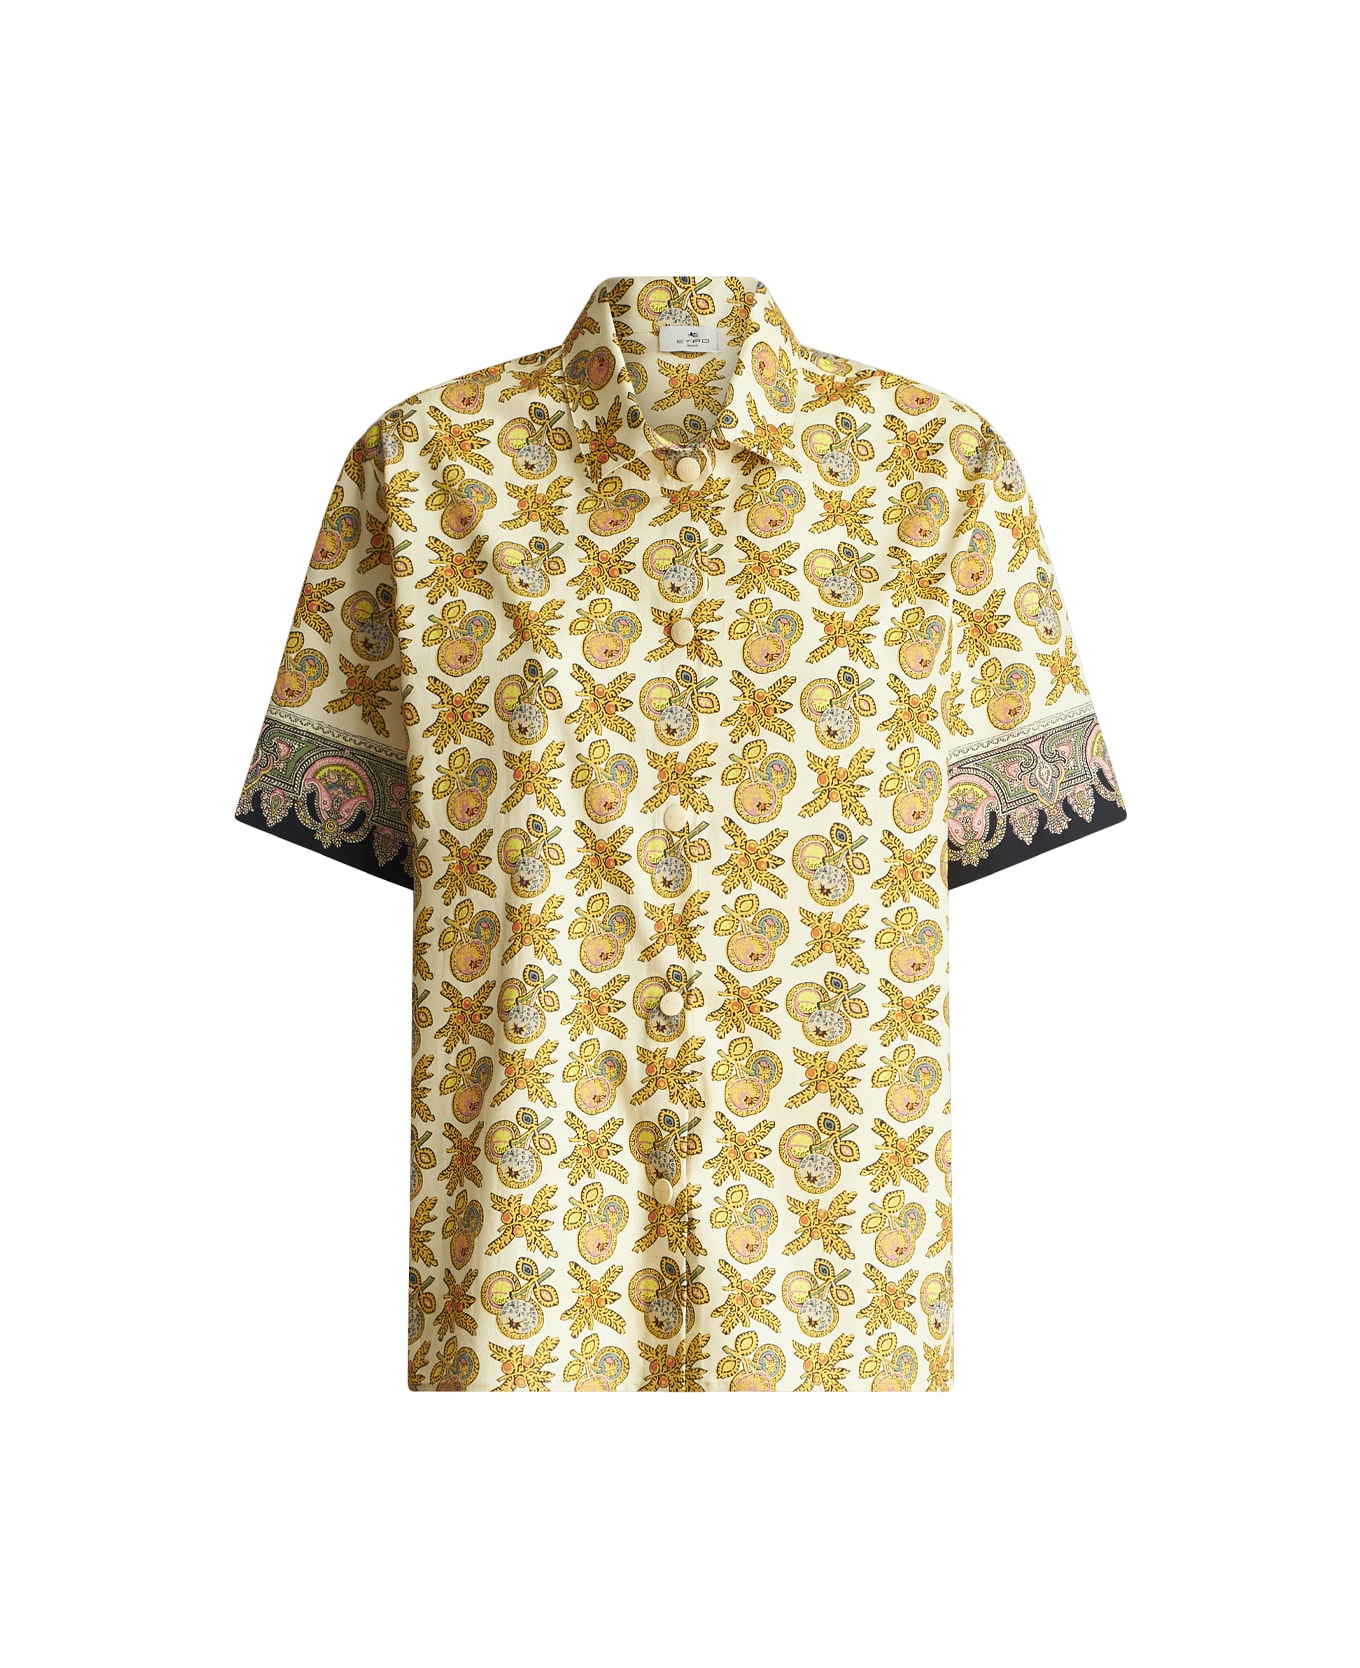 Etro White Shirt With Apples Print All-over